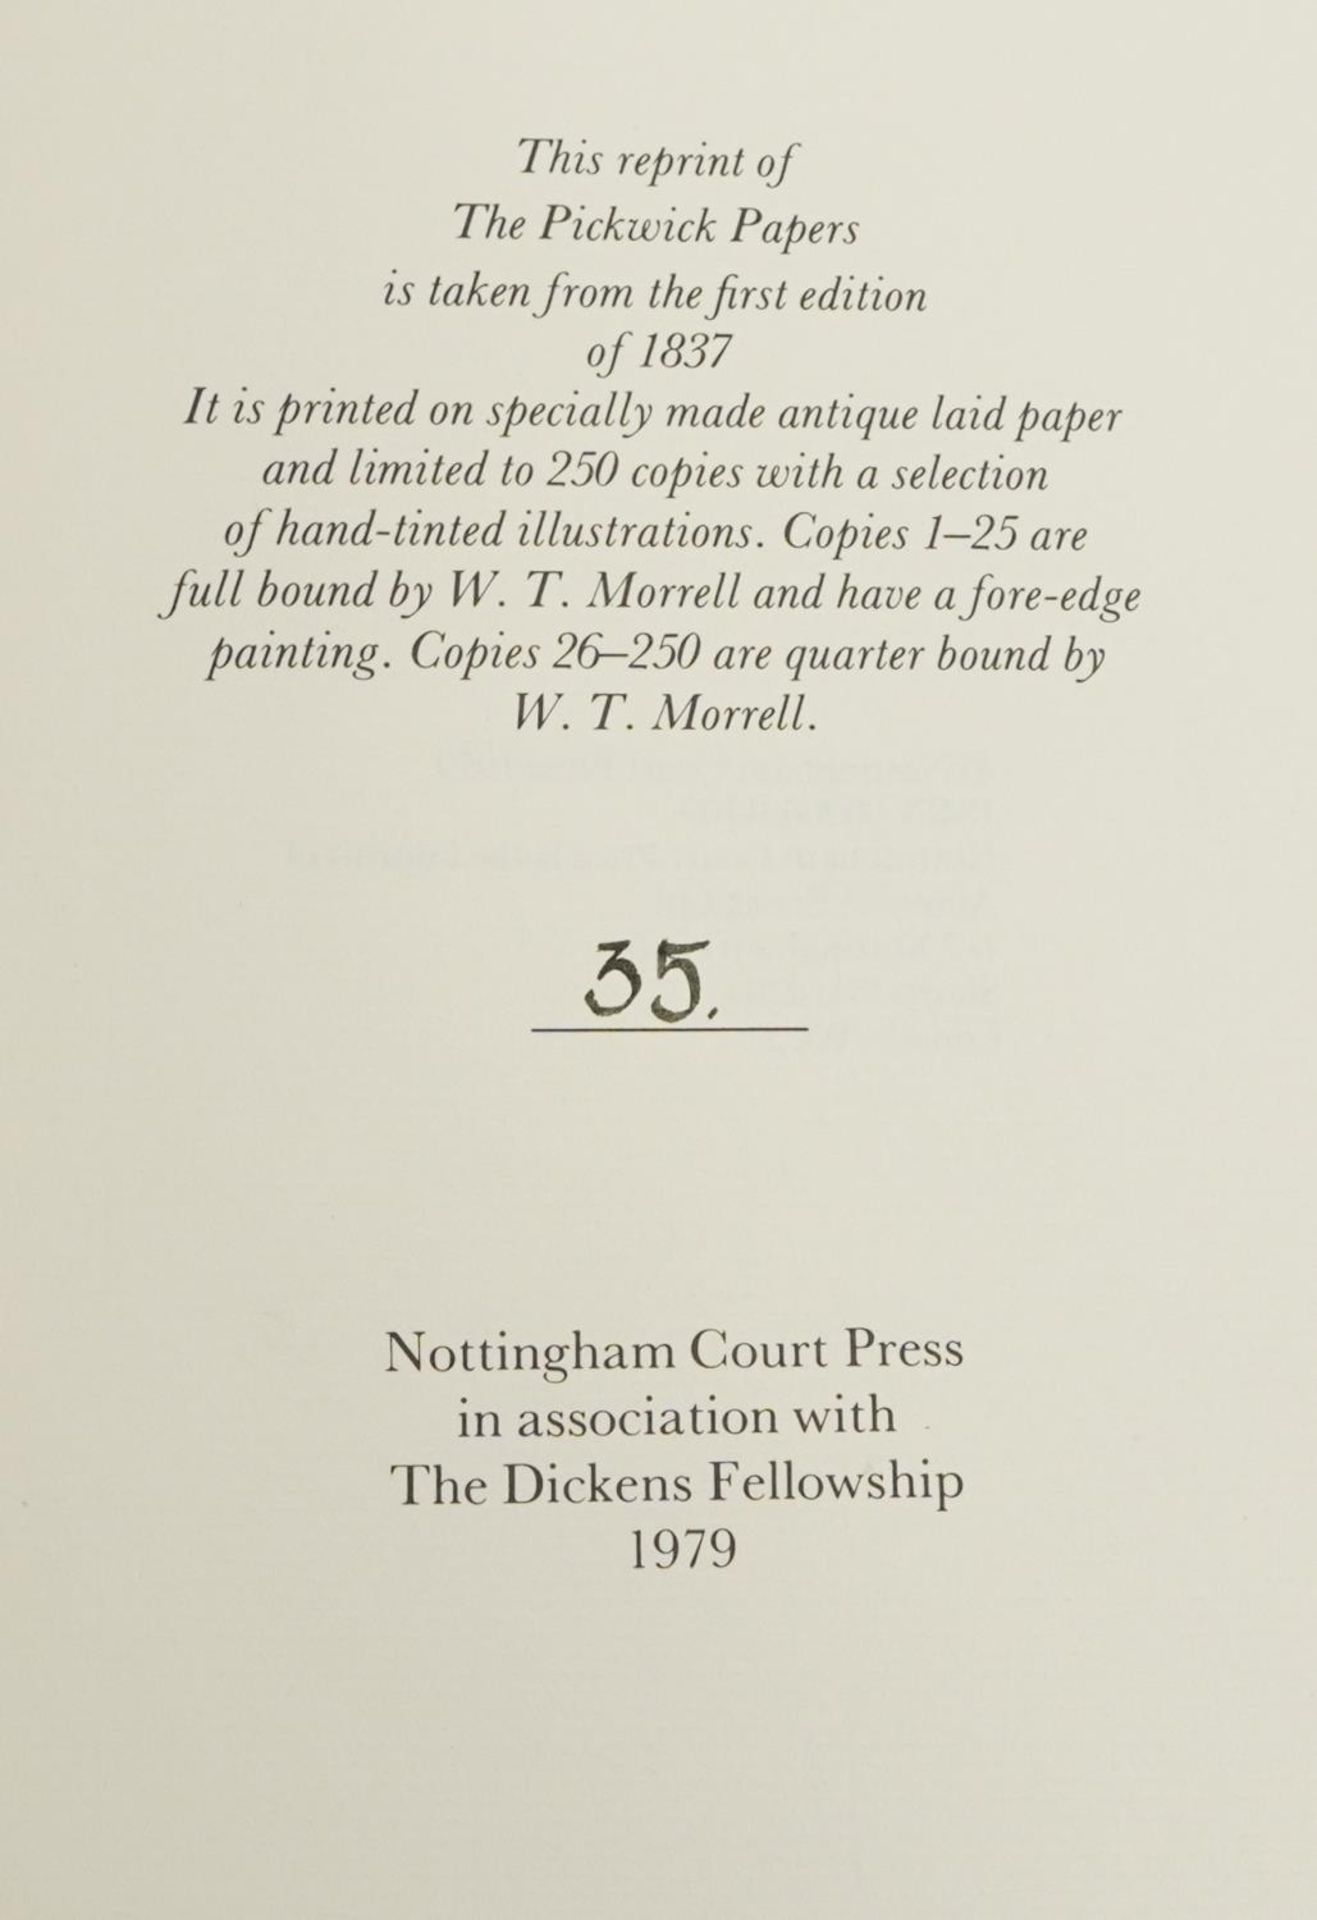 The Pickwick Papers, leather bound, gilt edged book, Nottingham Court press in association with - Image 2 of 6